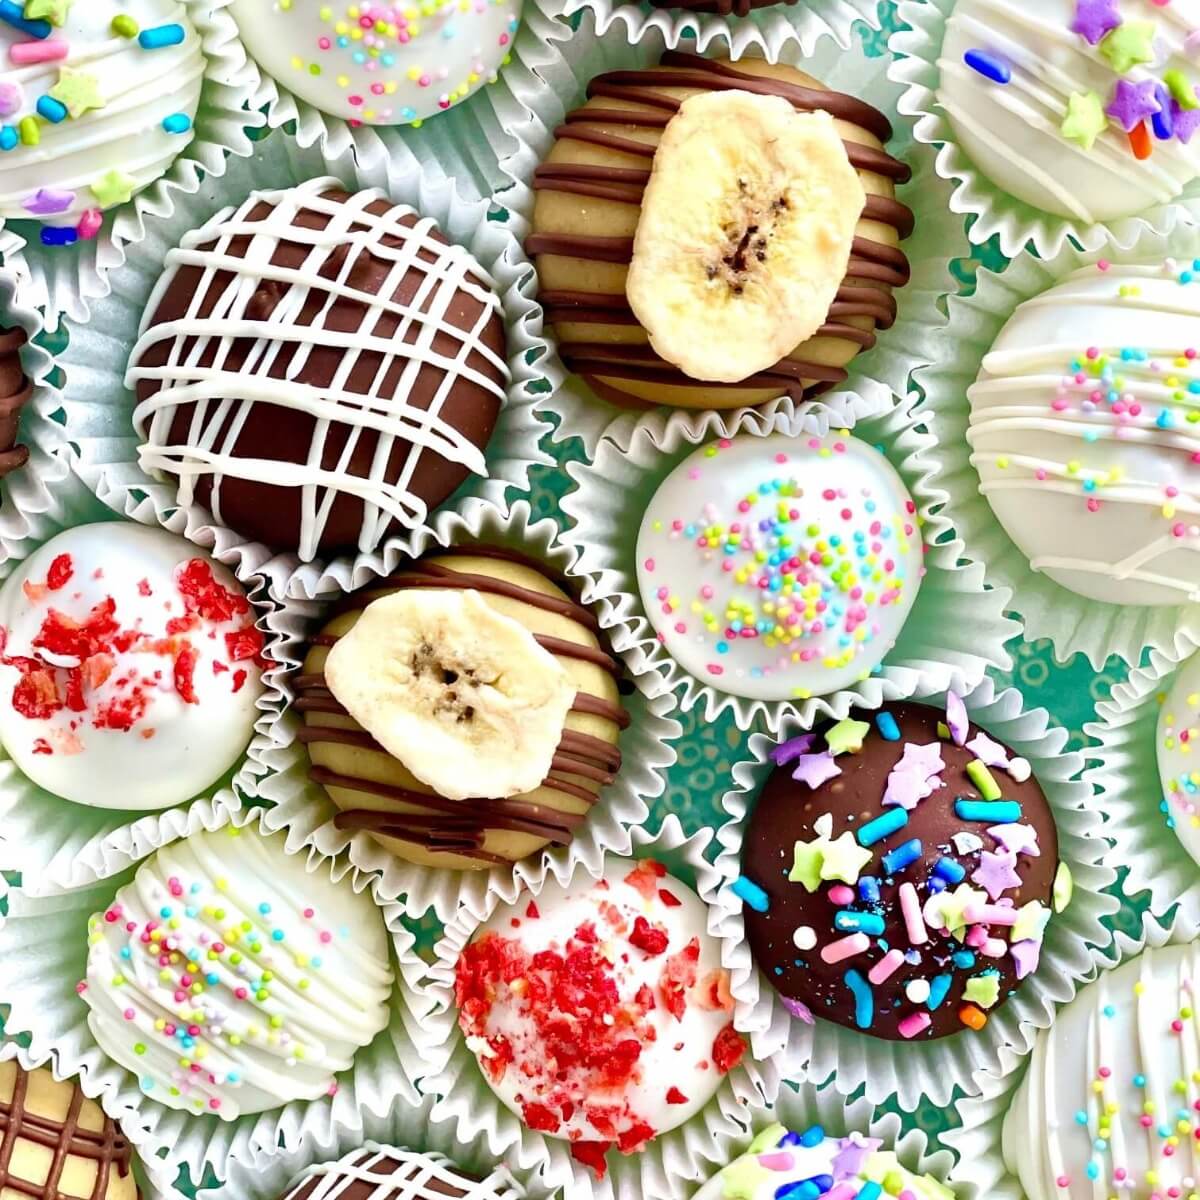 A close up of a variety of cake truffles in various flavors and decorations